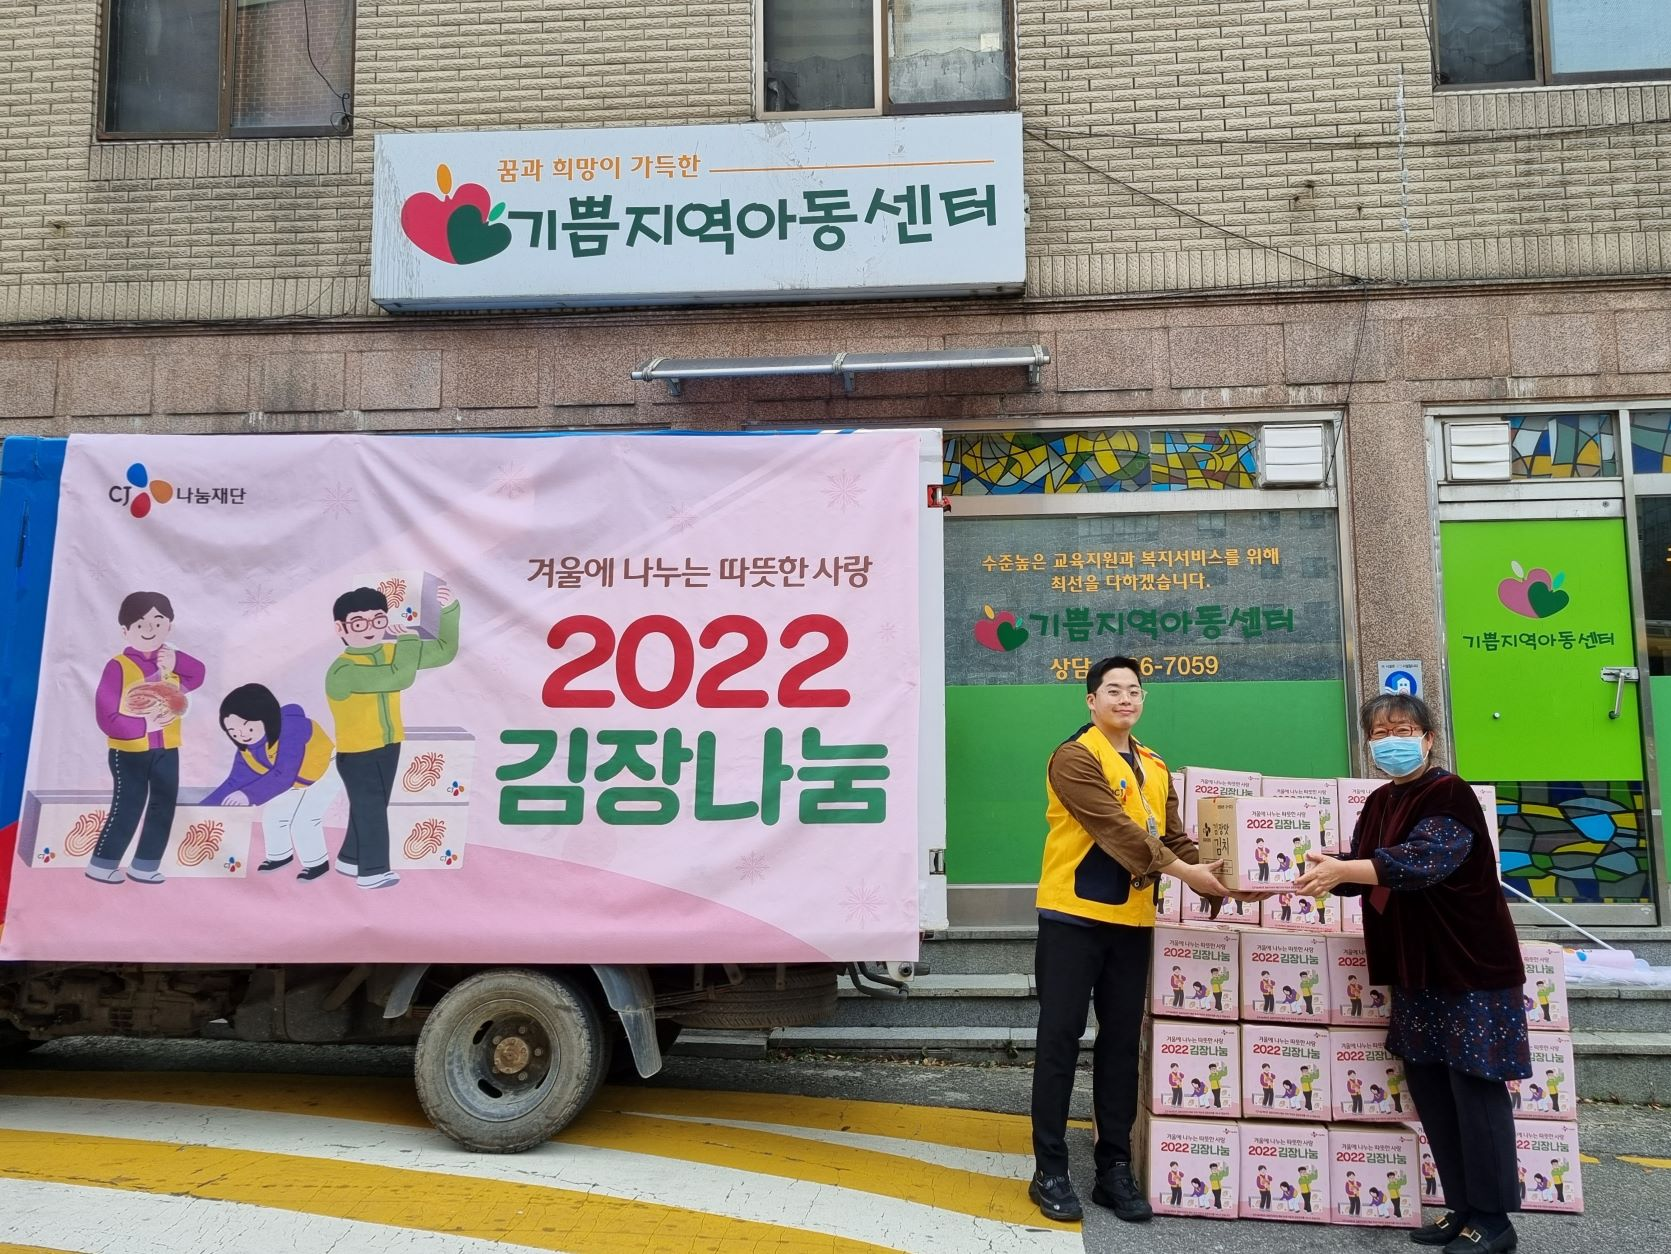 CJ CheilJedang is working towards regional advancement and mutual growth by ‘Kimchi Sharing Program’, a flagship product that the company is manufacturing, with the local community at all of its business sites at the end of the year. We shared Kimchi with the elderly, vulnerable children and people with disabilities and in 2021, we delivered 411 boxes of Kimchi to 2,055 people from the vulnerable group. For the holidays, our Jincheon site delivered 105 boxes of our Tteokgalbi product to five of their local villages for mutual cooperation. Our Incheon site supported the people in the vulnerable groups within their region by sharing gifts.